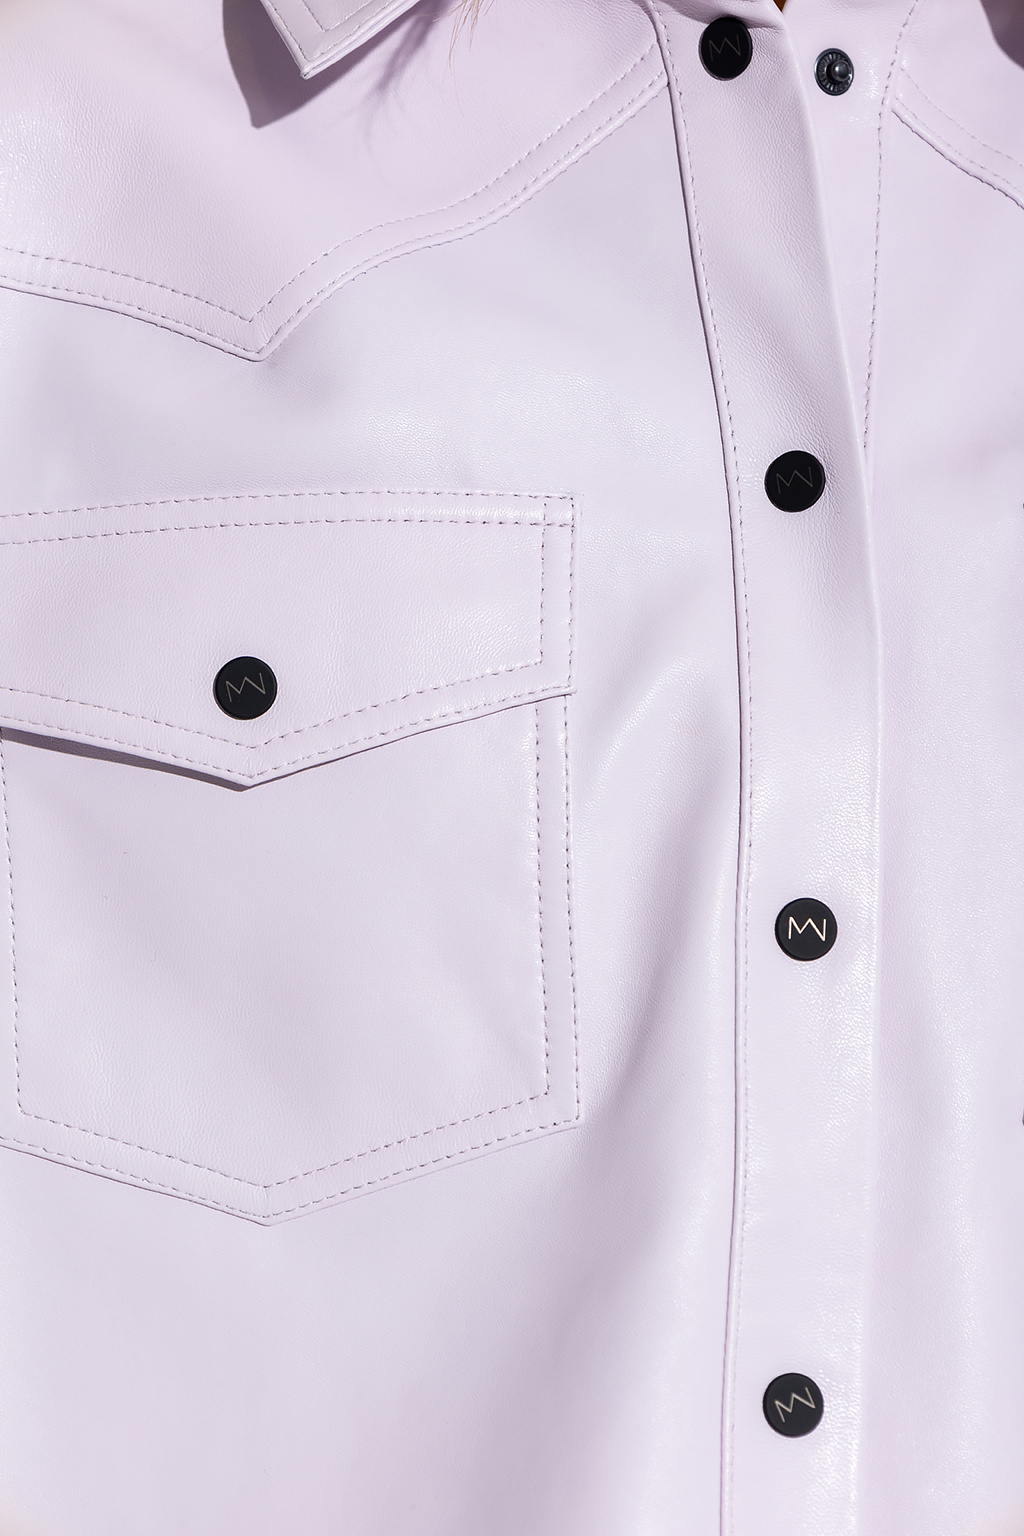 The Mannei ‘Palini’ leather shirt